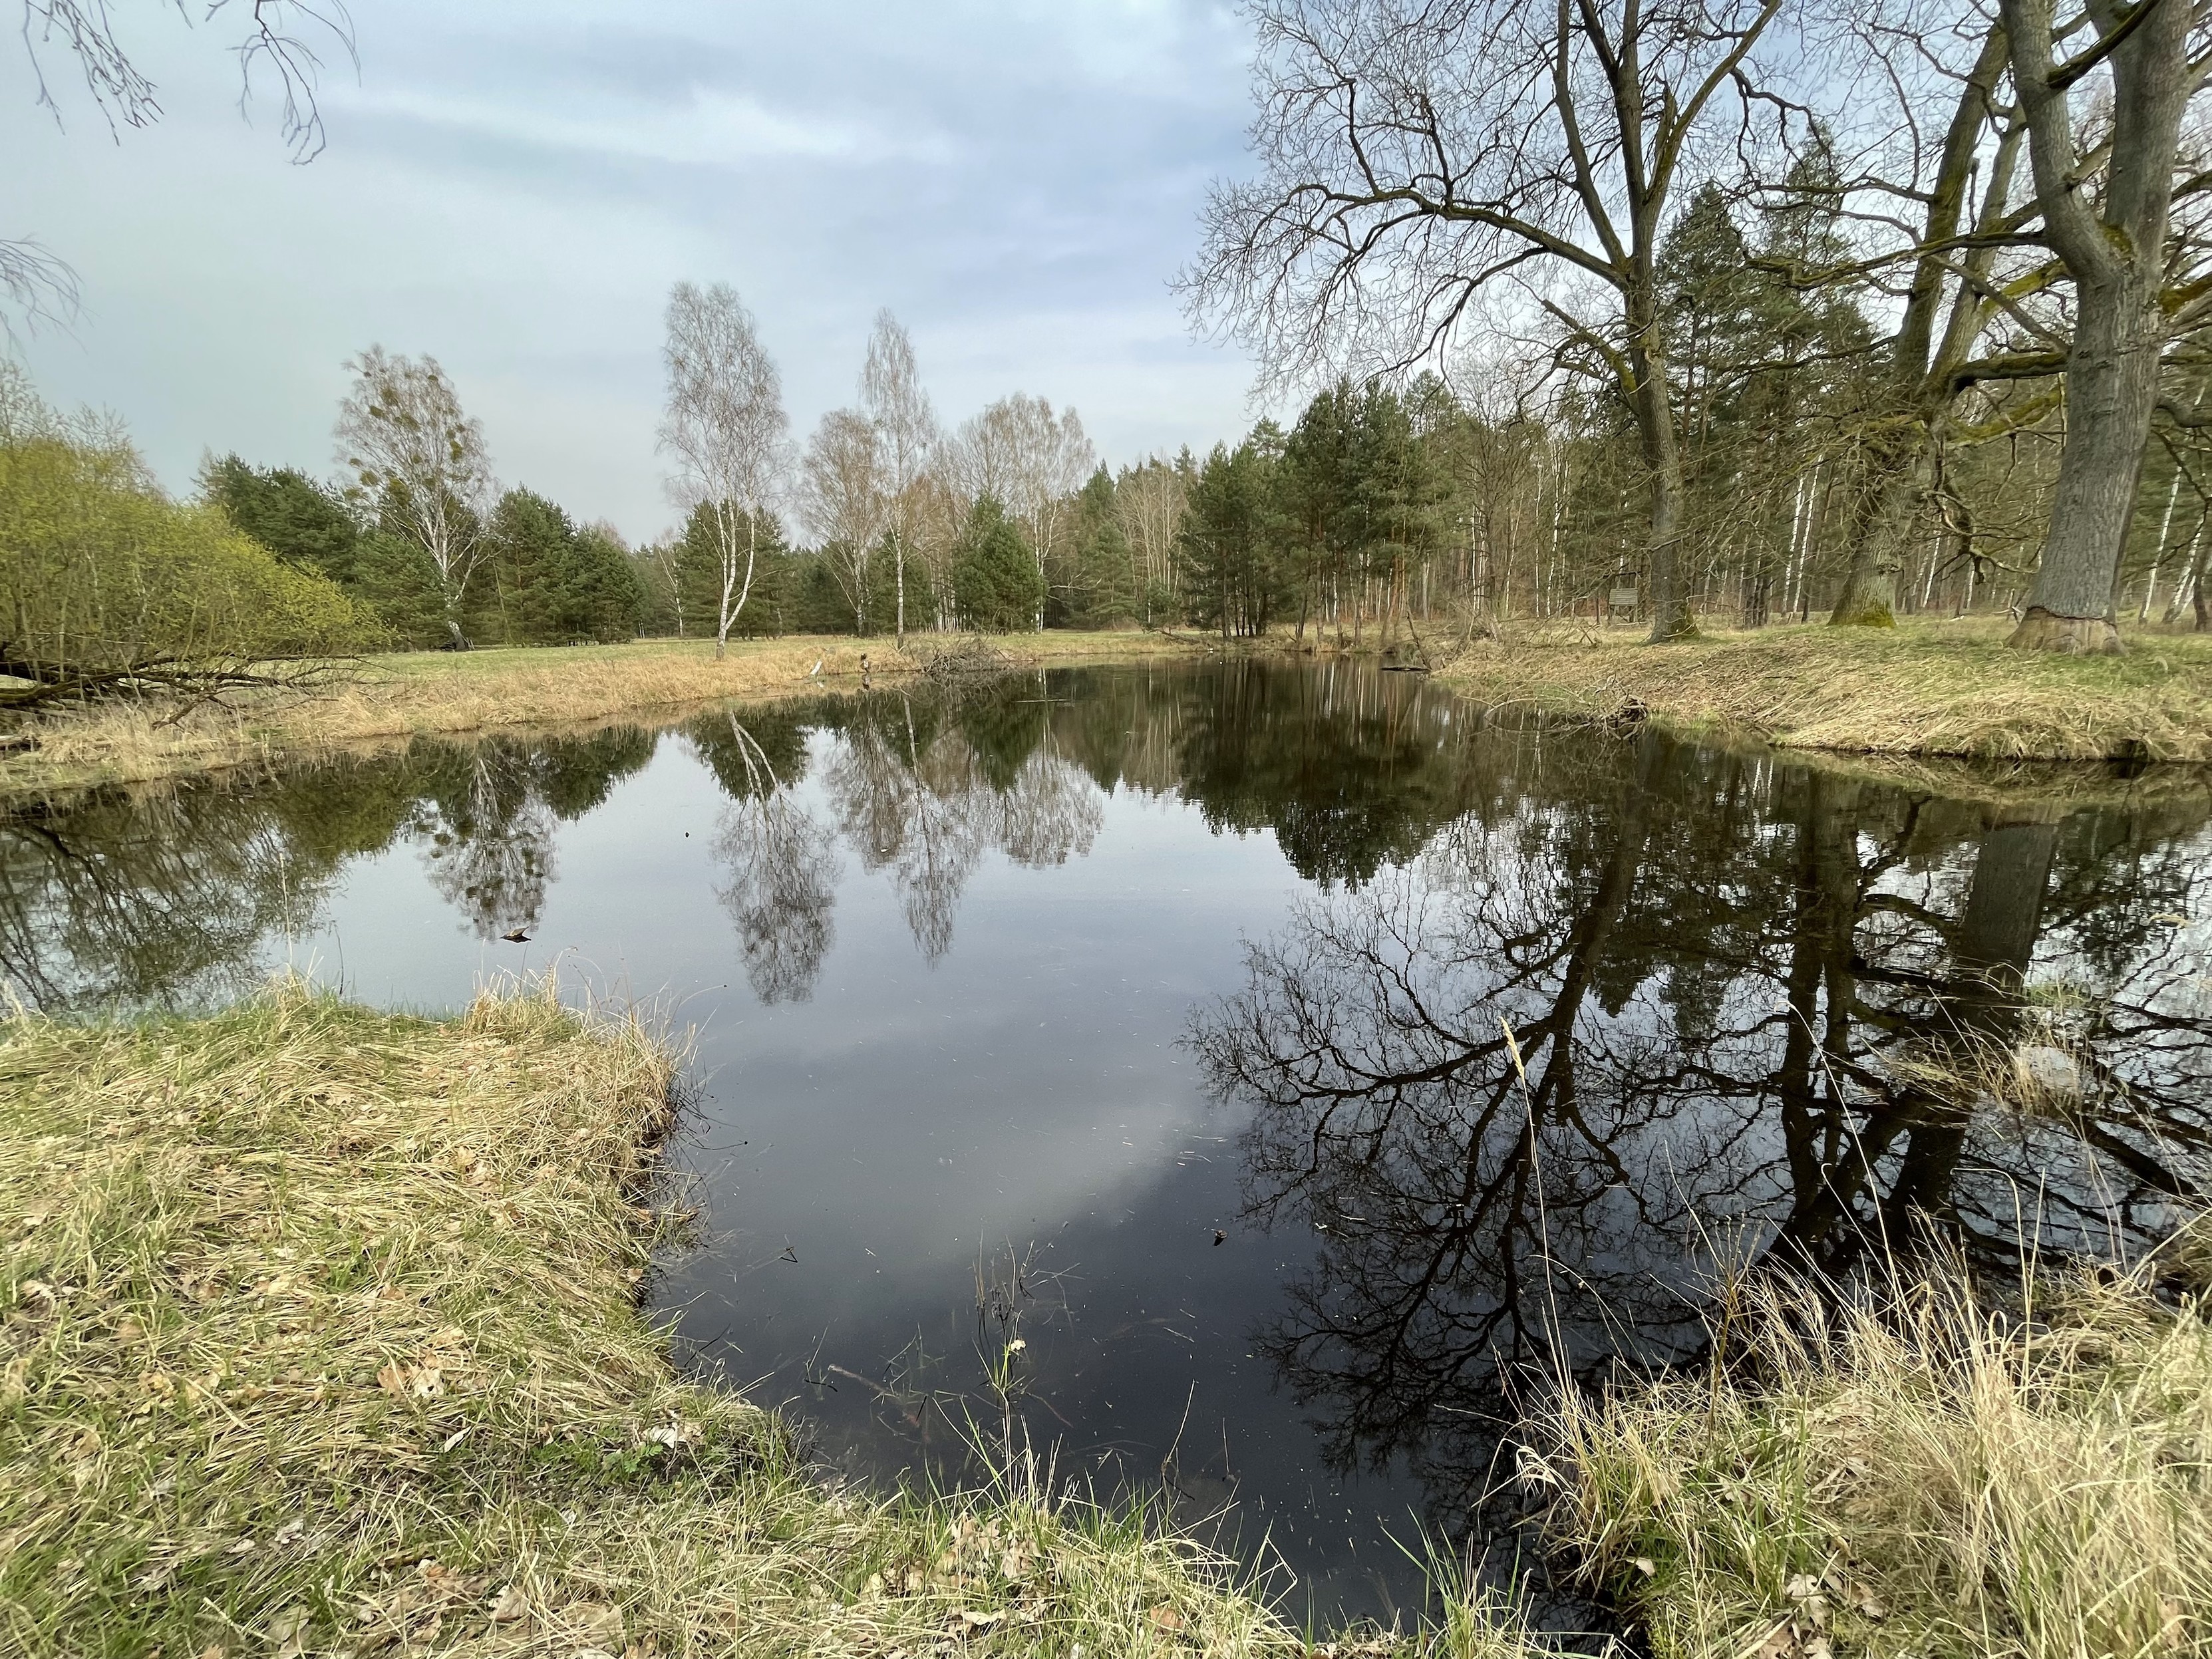 A tranquil pond surrounded by trees and grass with reflections visible on the water's surface.